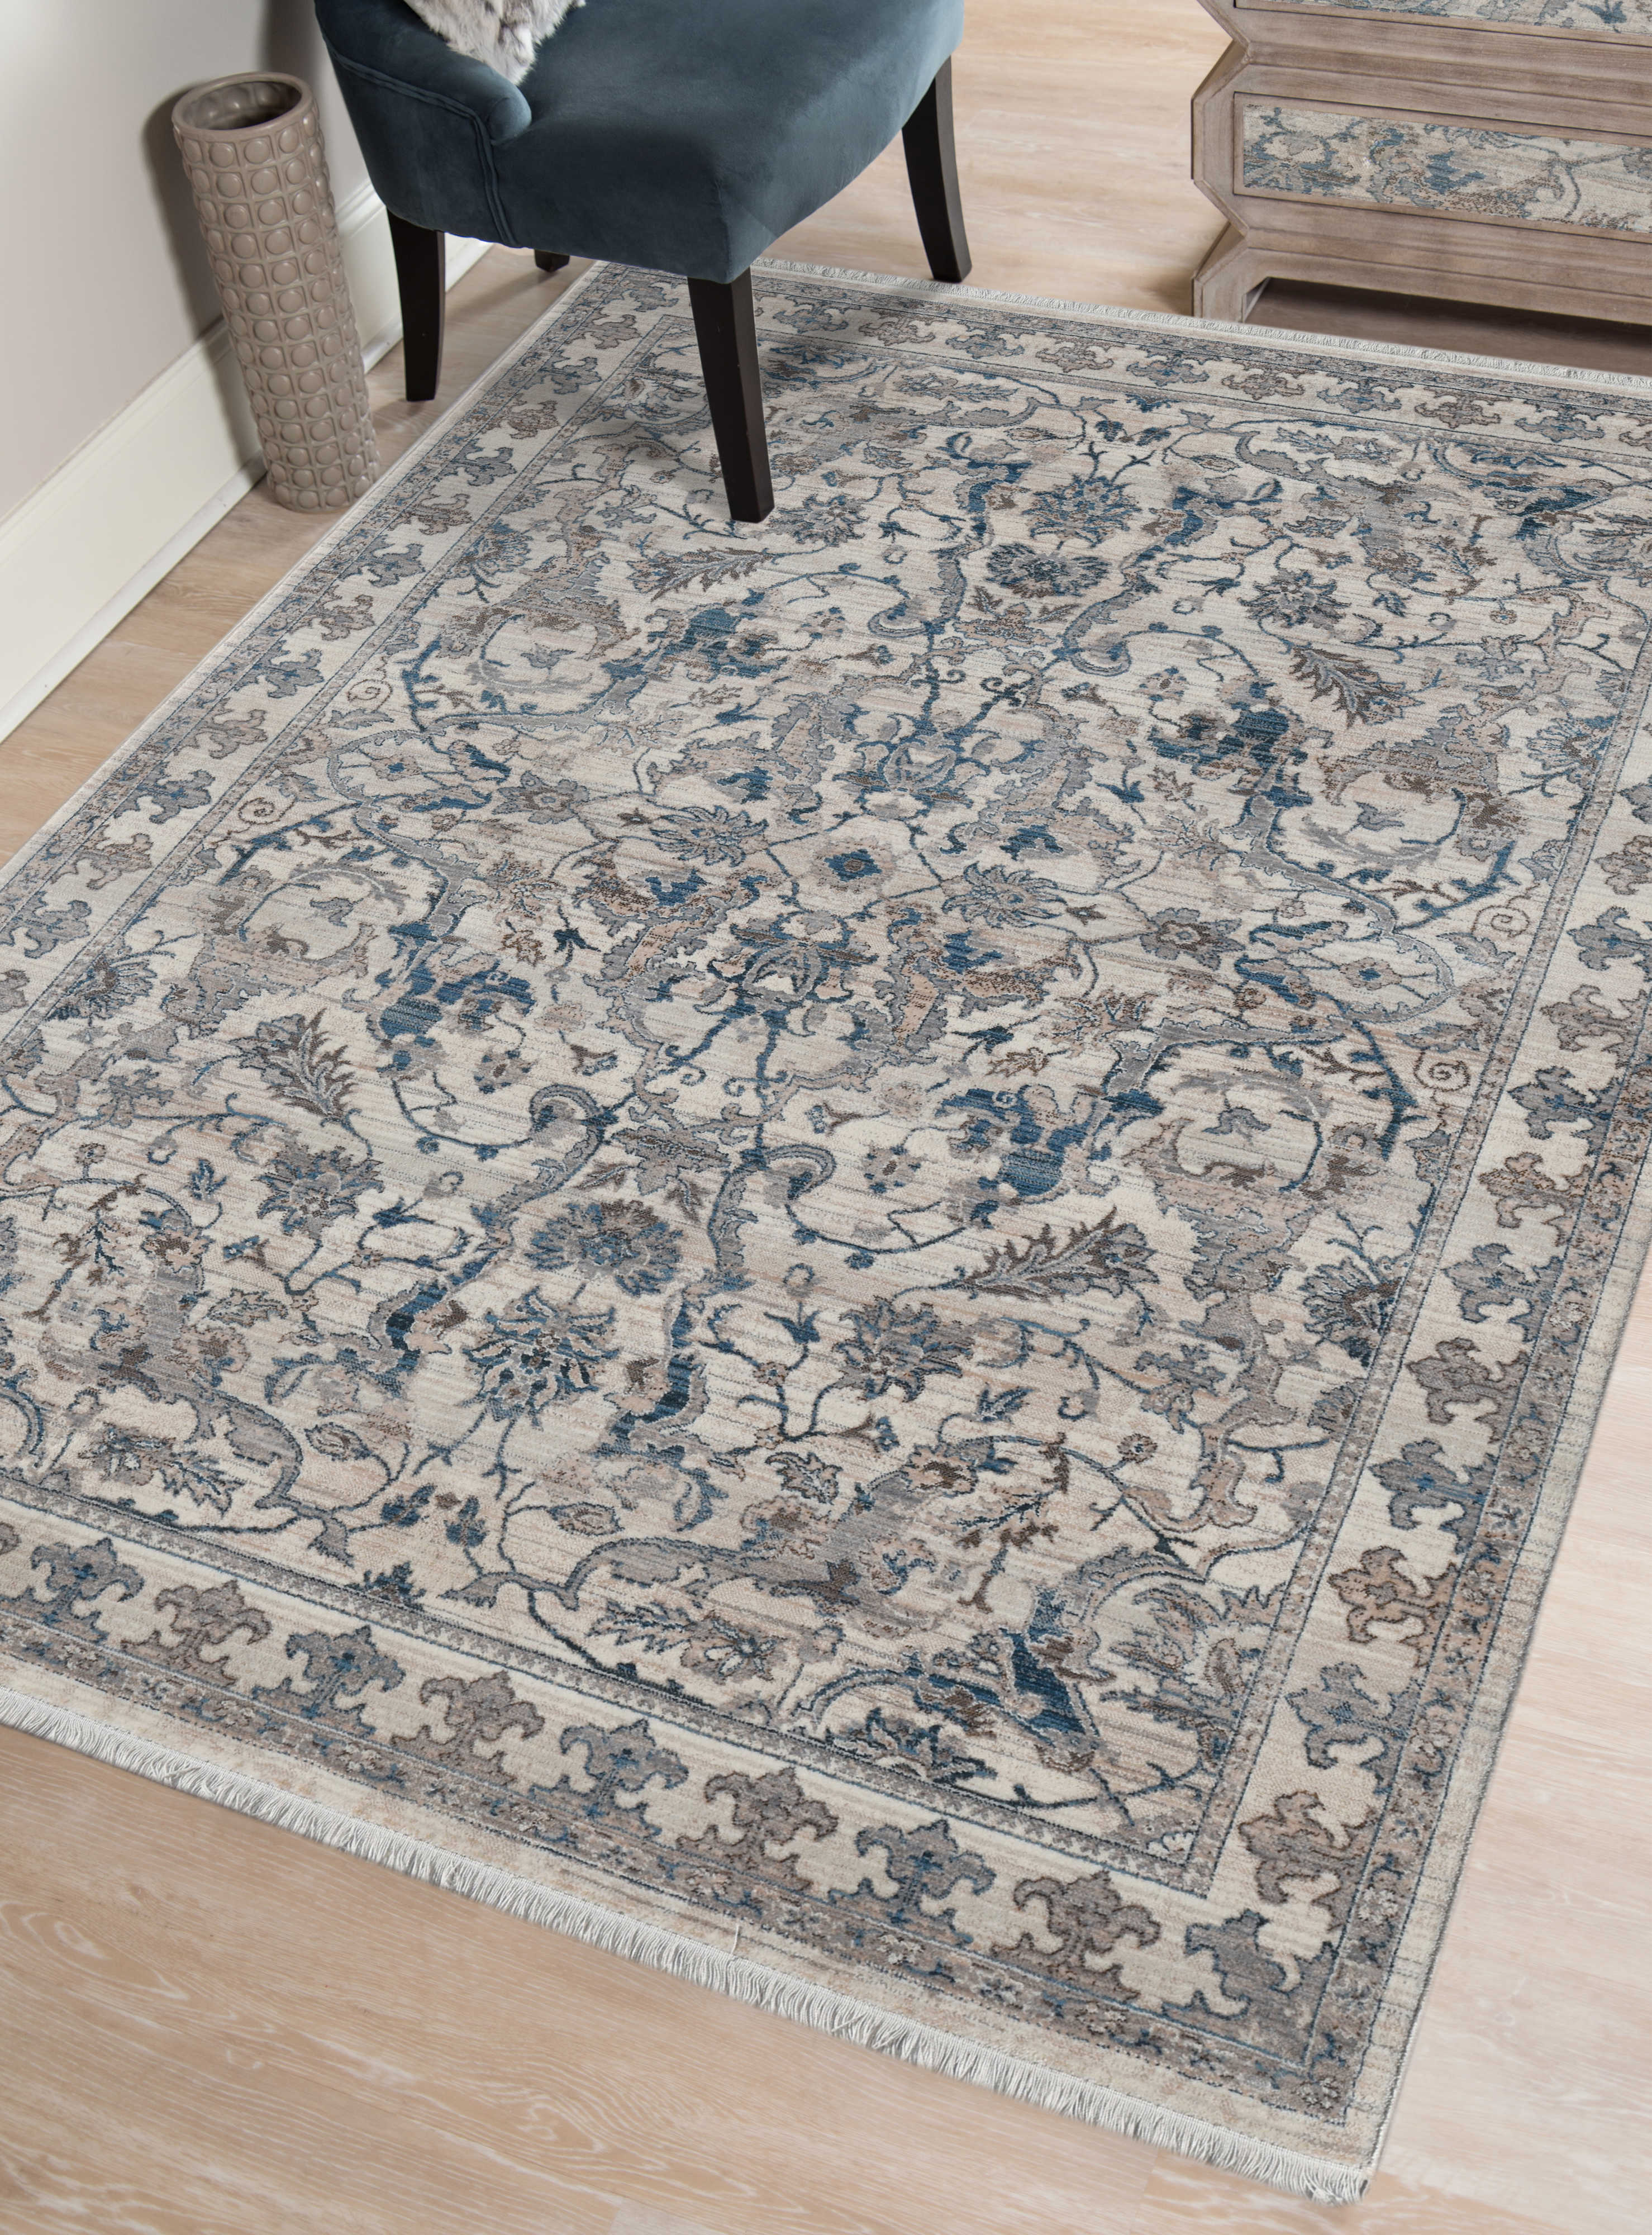 Amer Rugs Arcadia Cream Blue Brown, Cream Brown And Turquoise Rug